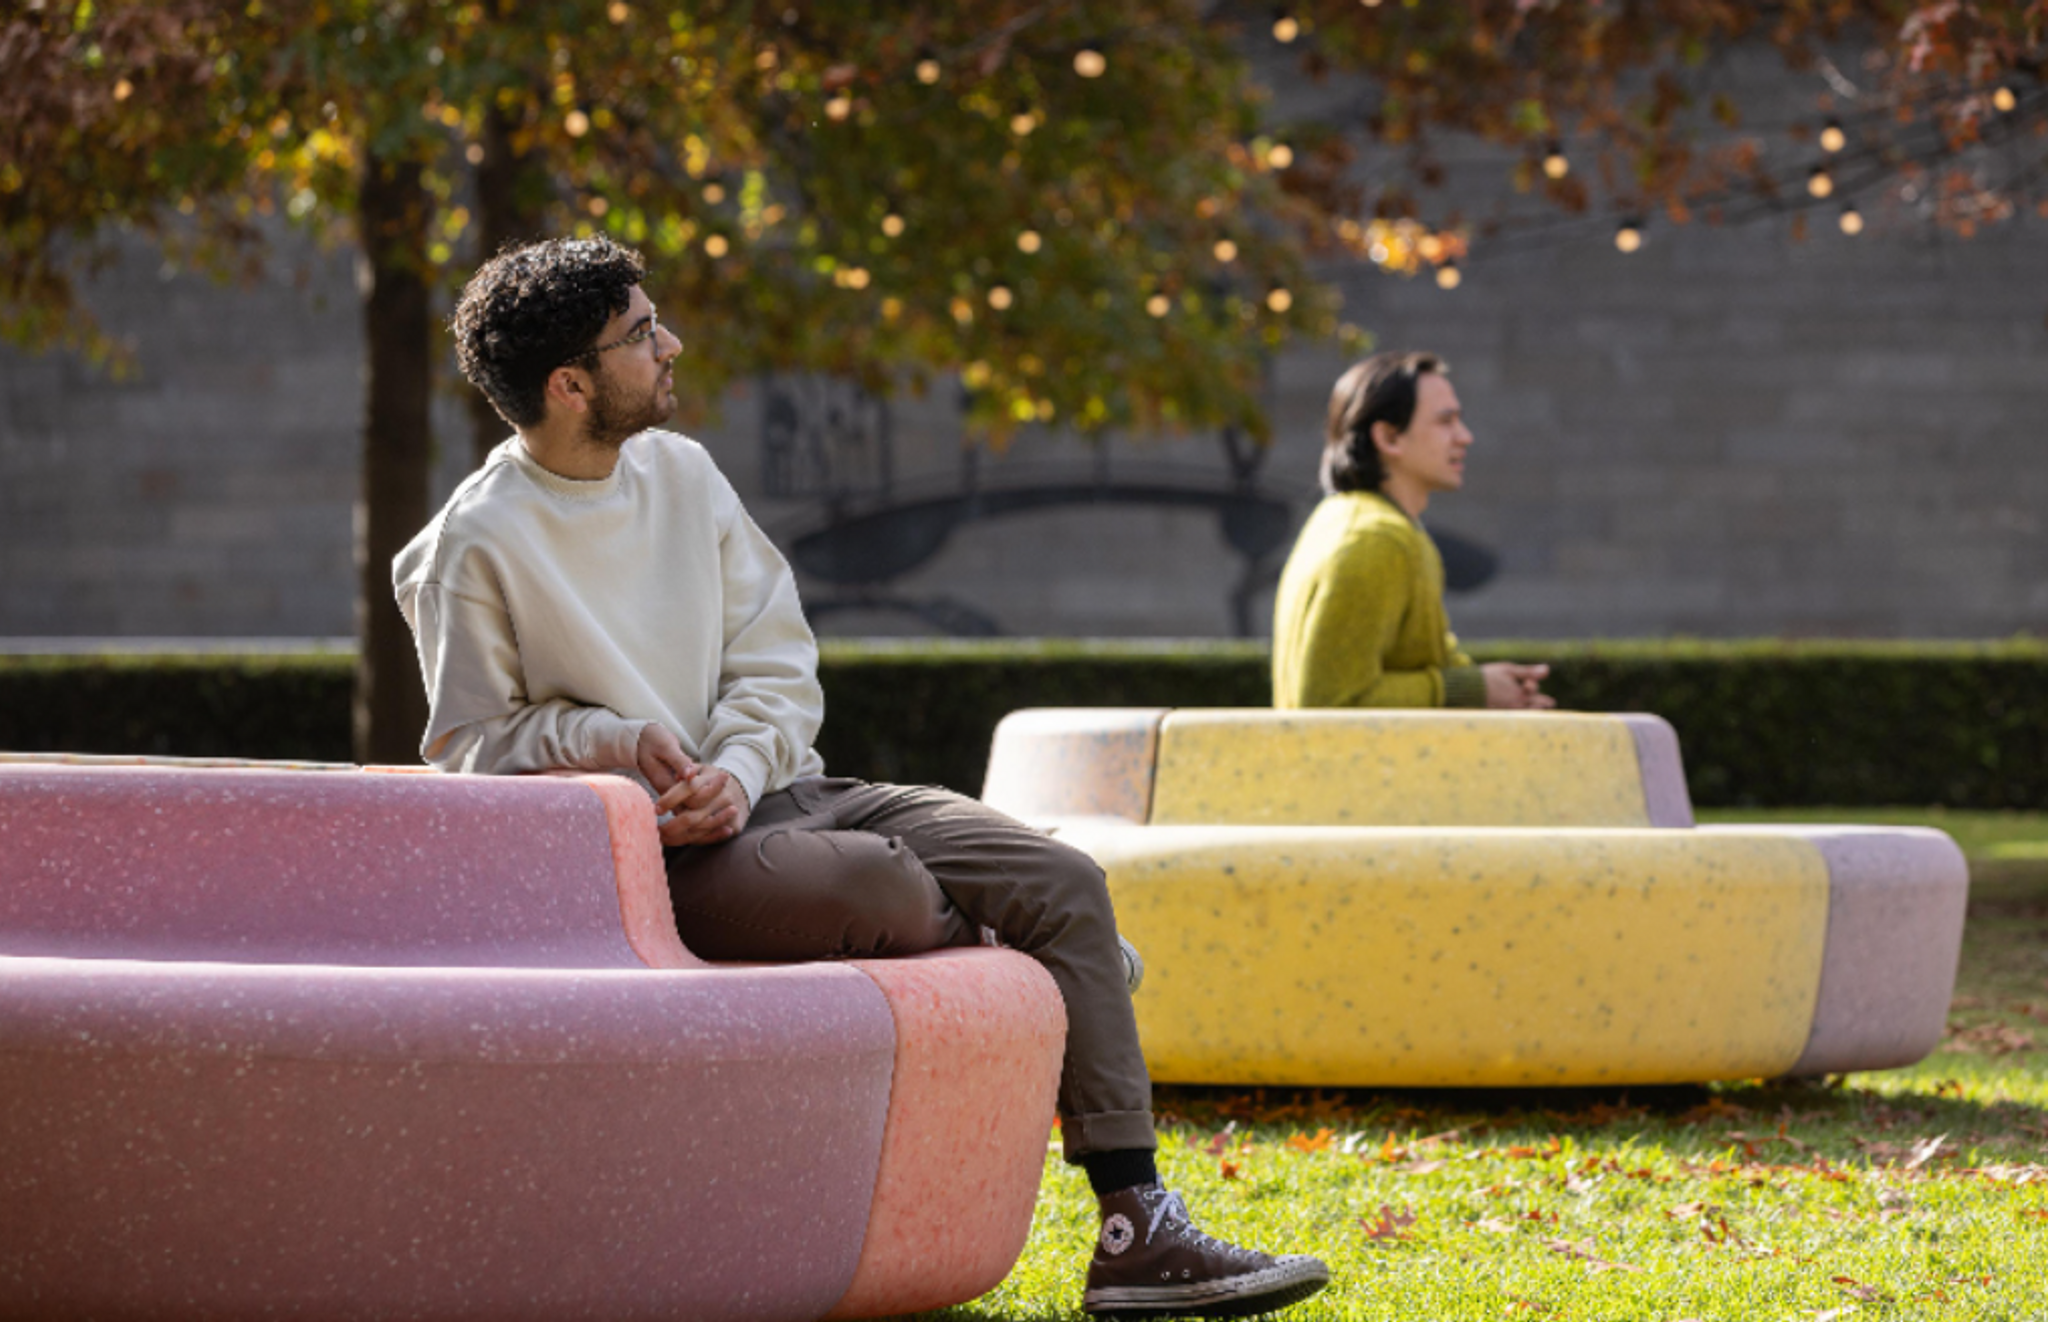 Eco-benches offer Aussies an escape from urban life